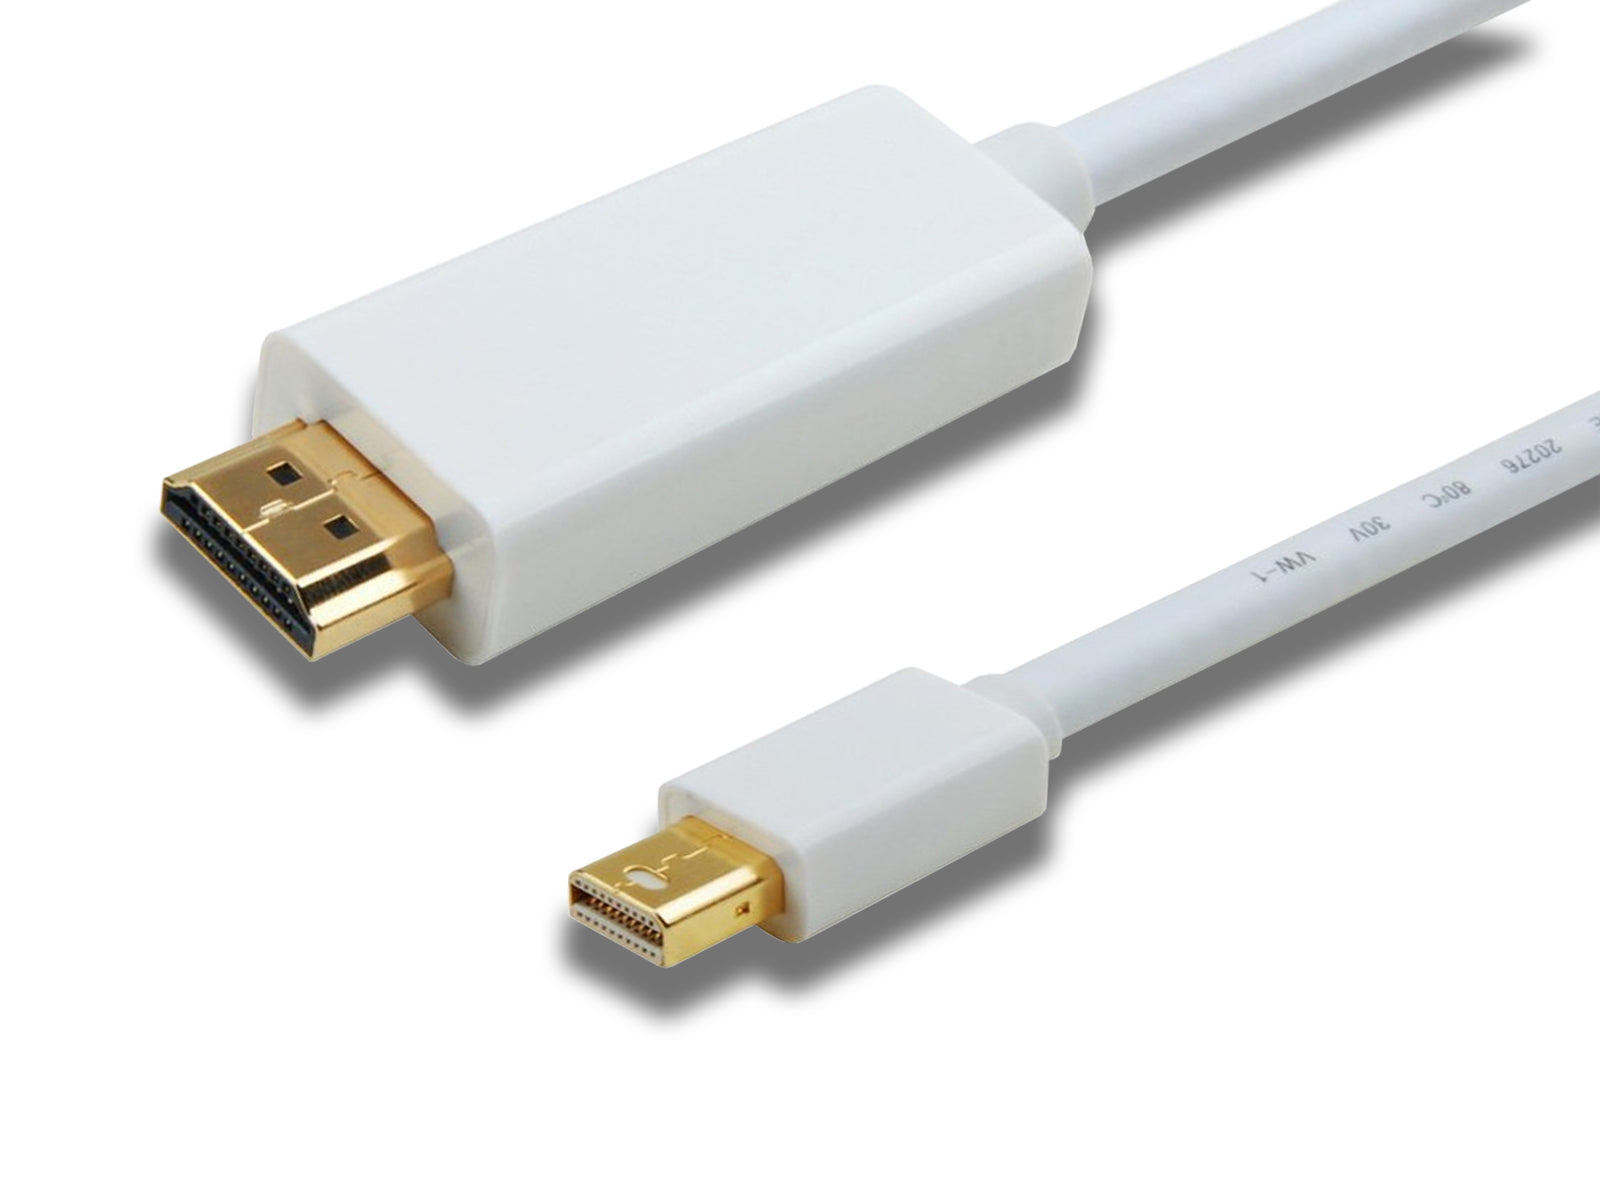 Mini DisplayPort to HDMI Cable Showing Both Ports